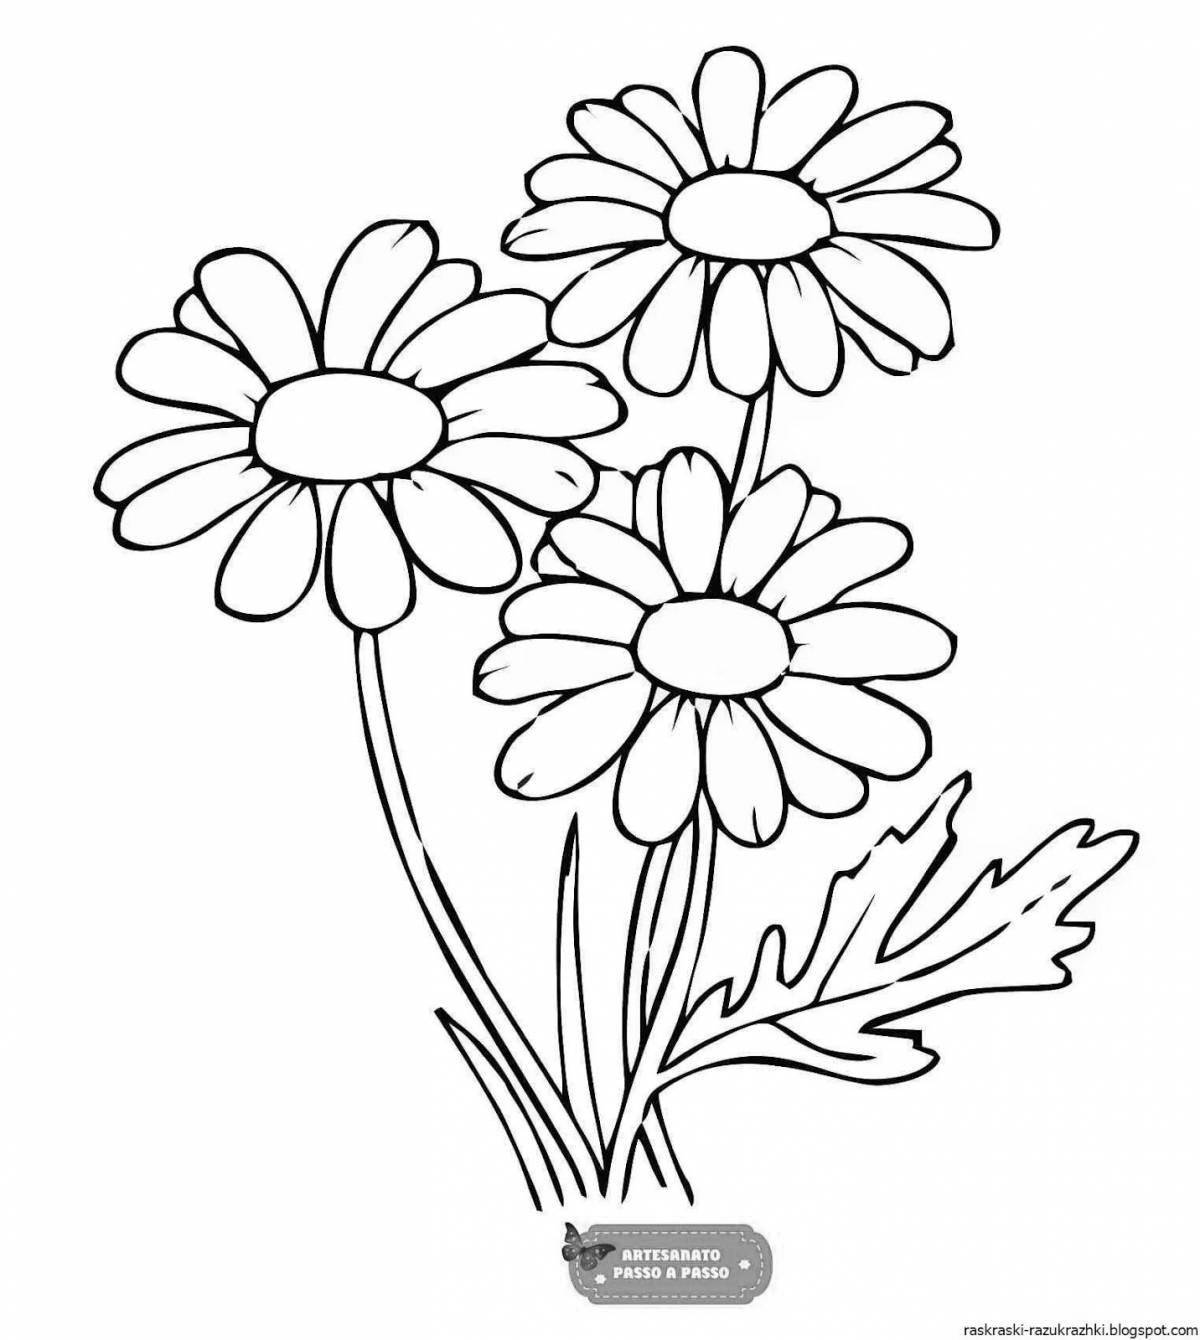 Amazing daisy coloring page